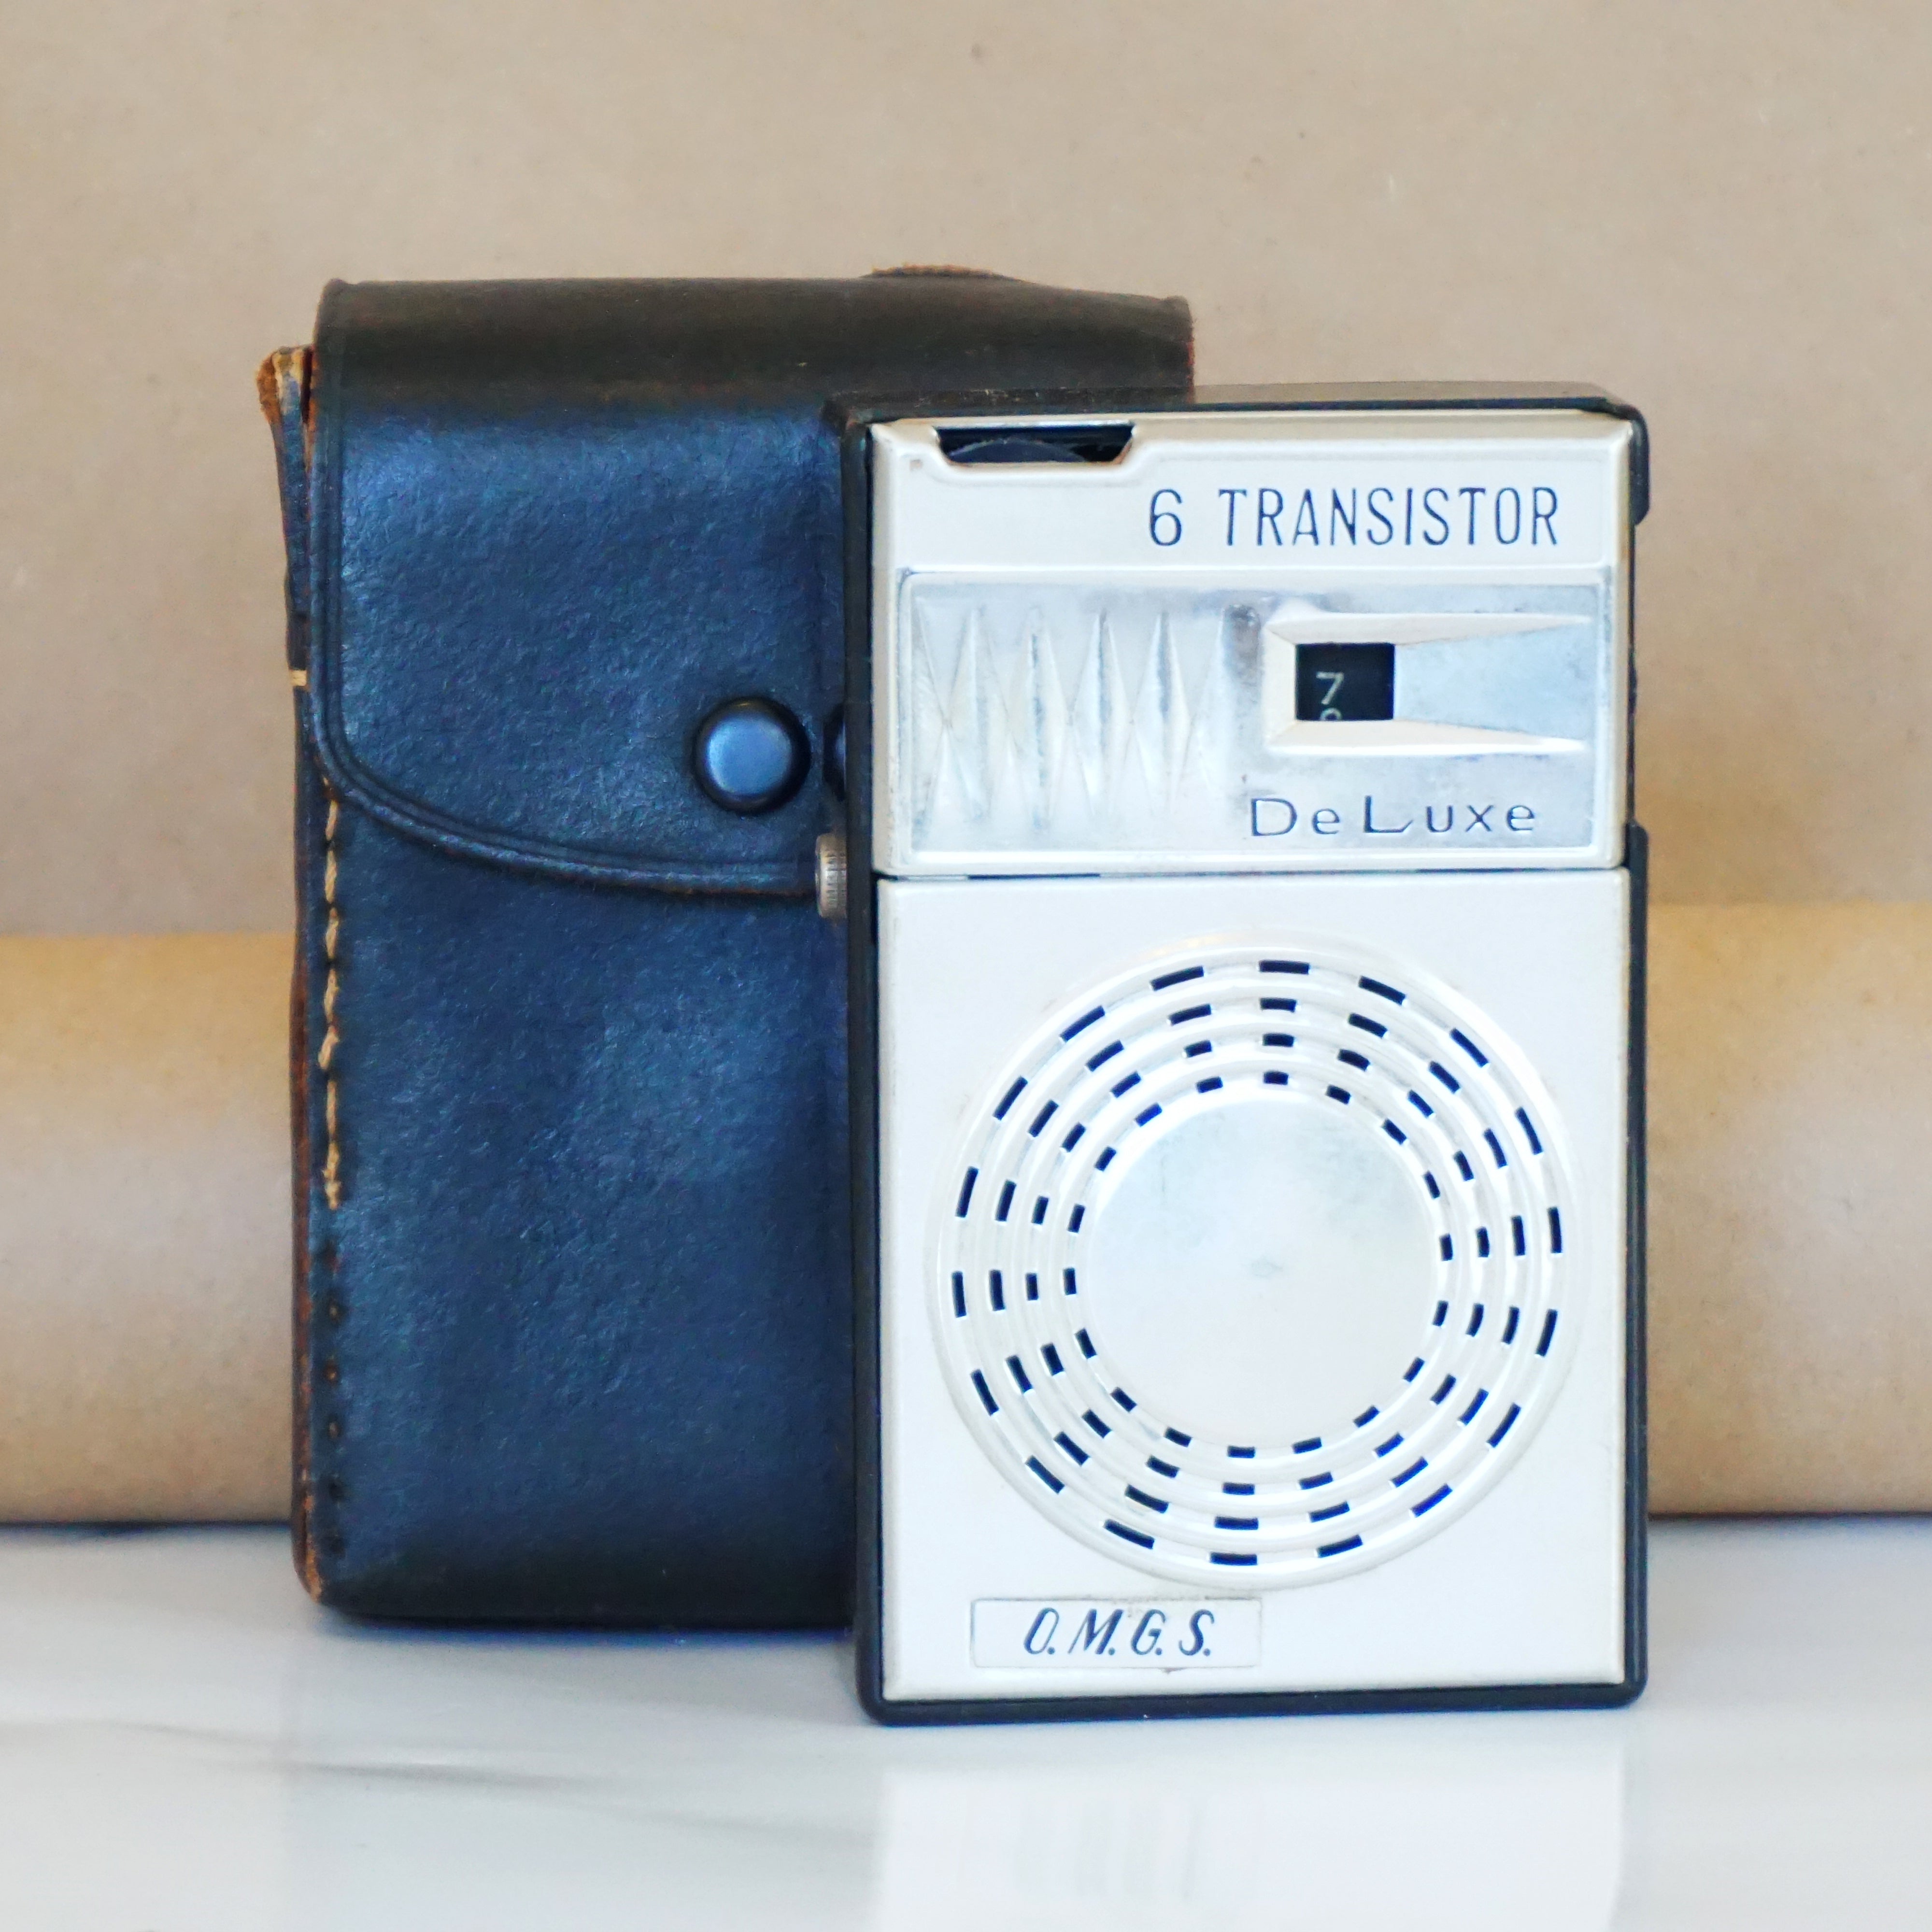 Vintage DELUXE 6 Transistor O.M.G.S. Radio with Case. Made in Japan. H –  Sustainable Deco, Inc.